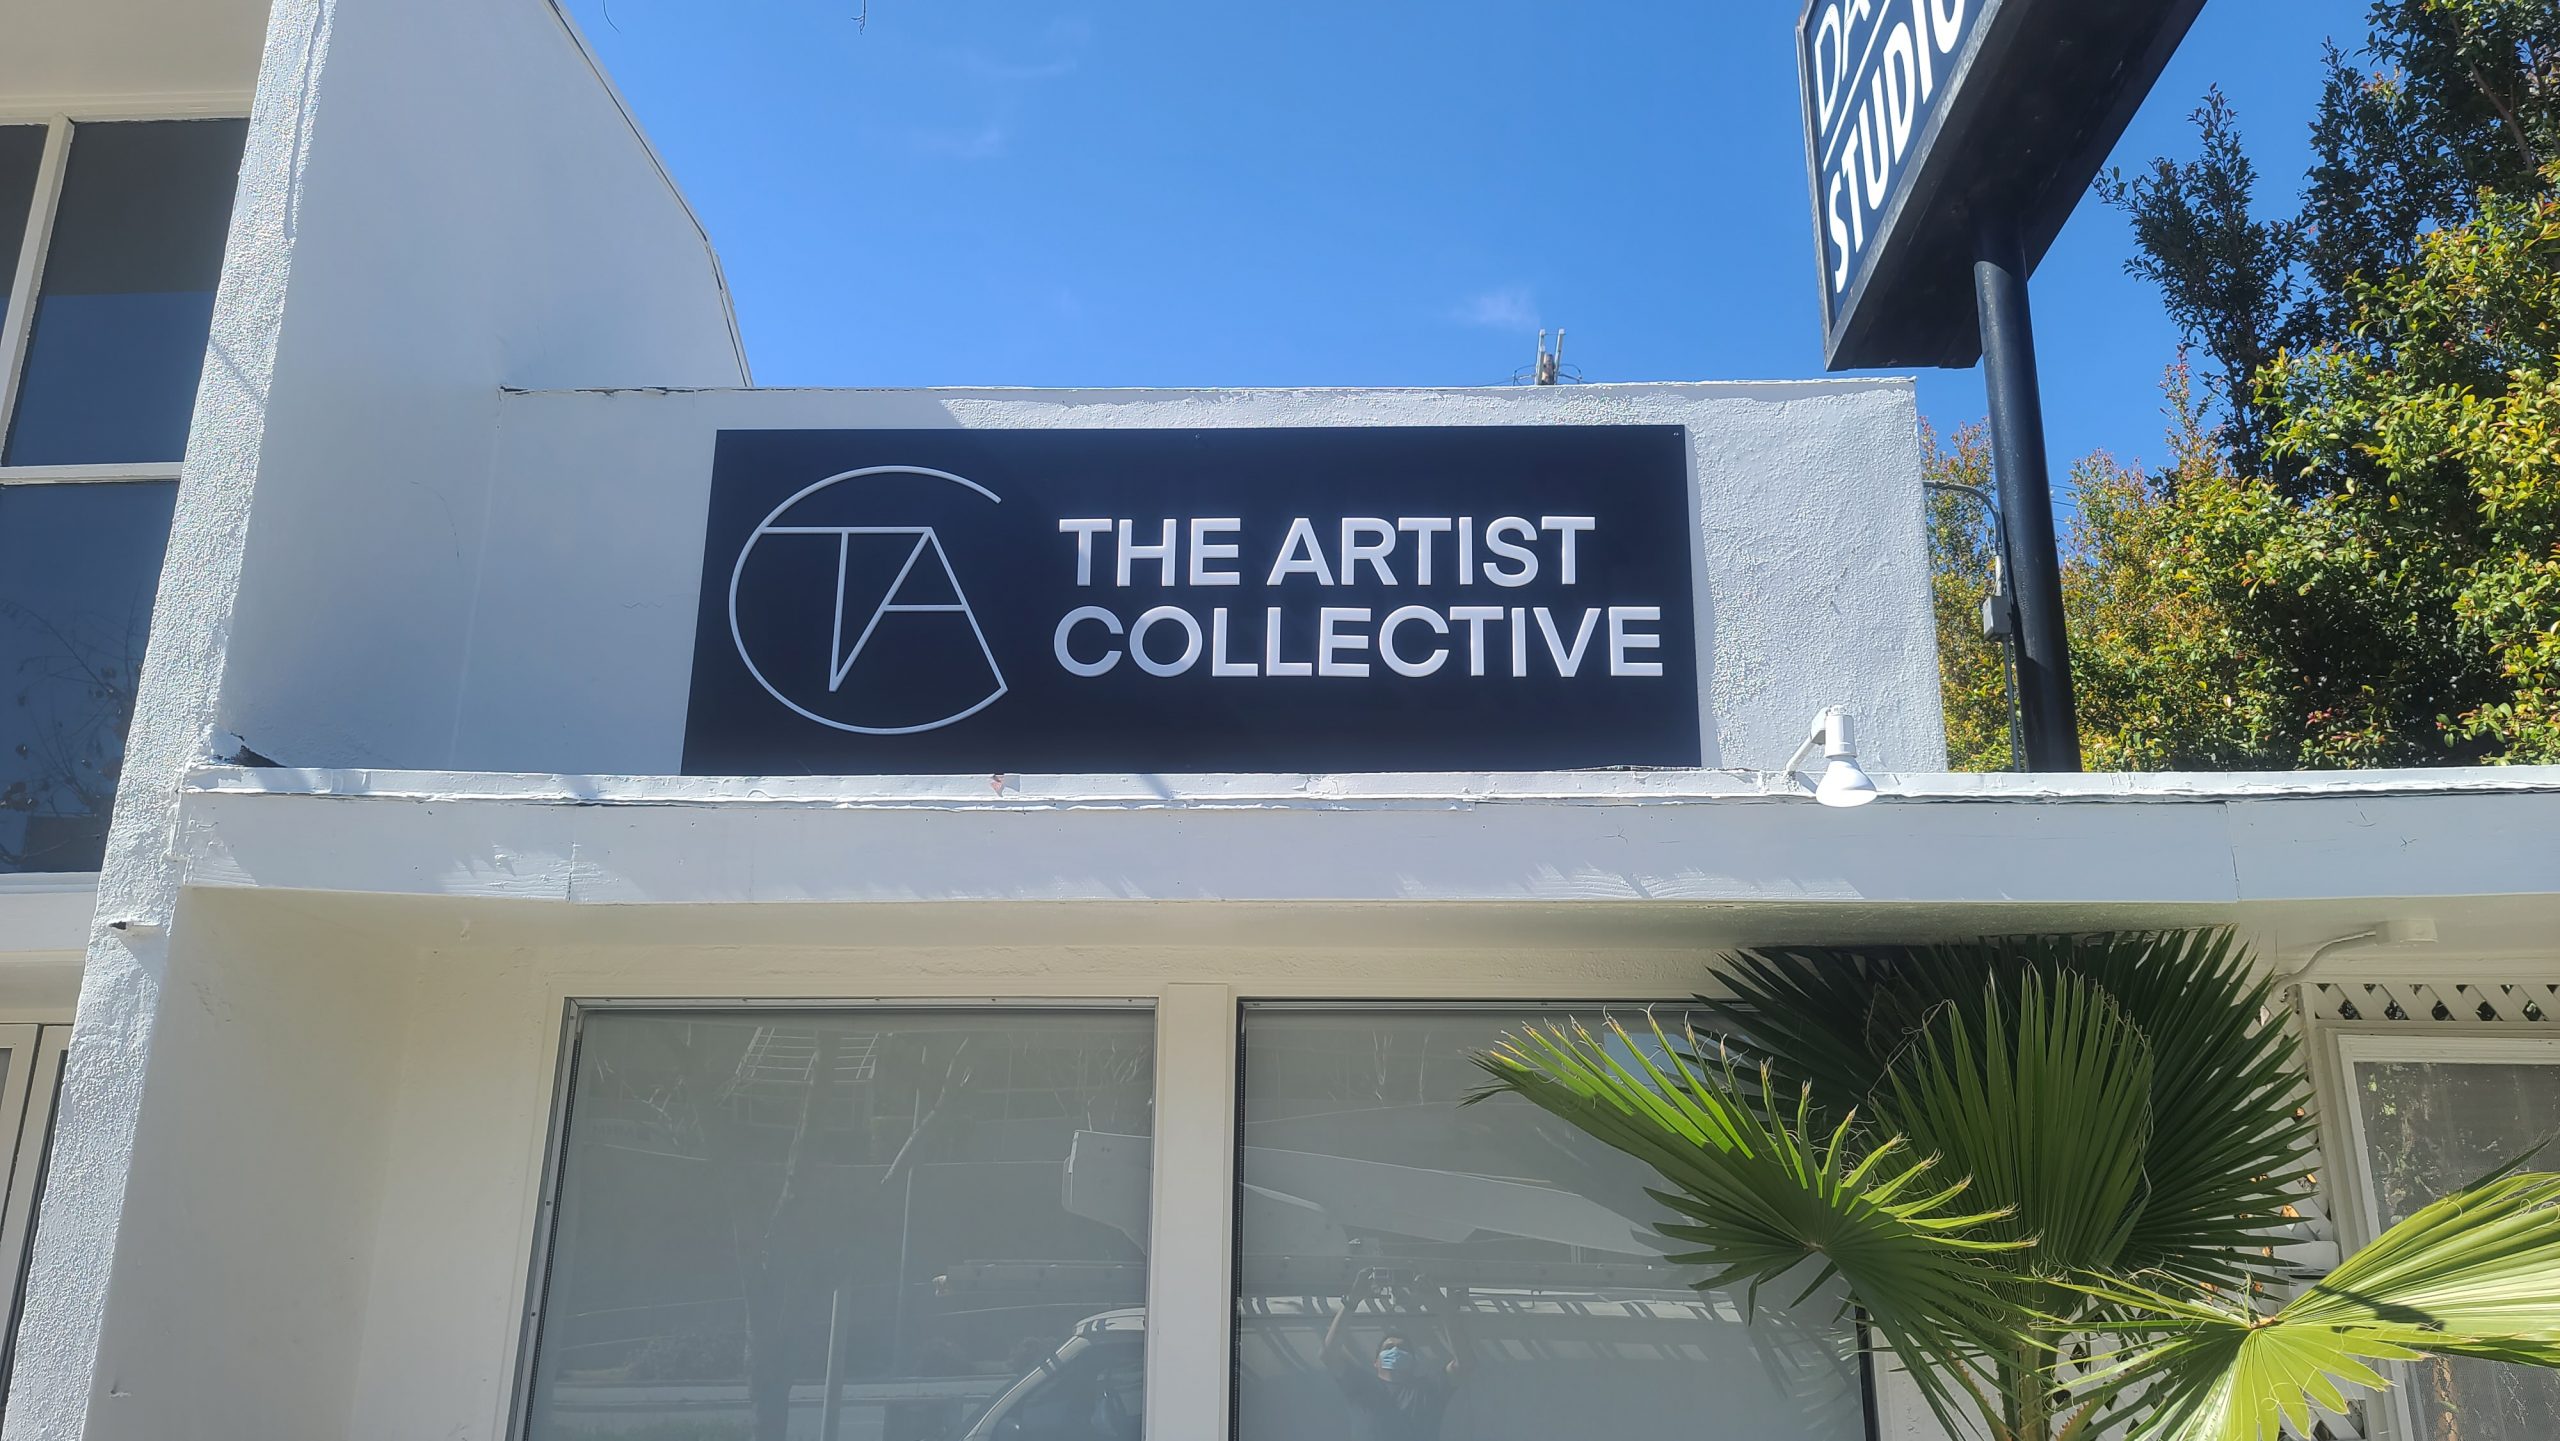 This is the custom dimensional lettering sign we fabricated and installed for The Artist Collective in Los Angeles.